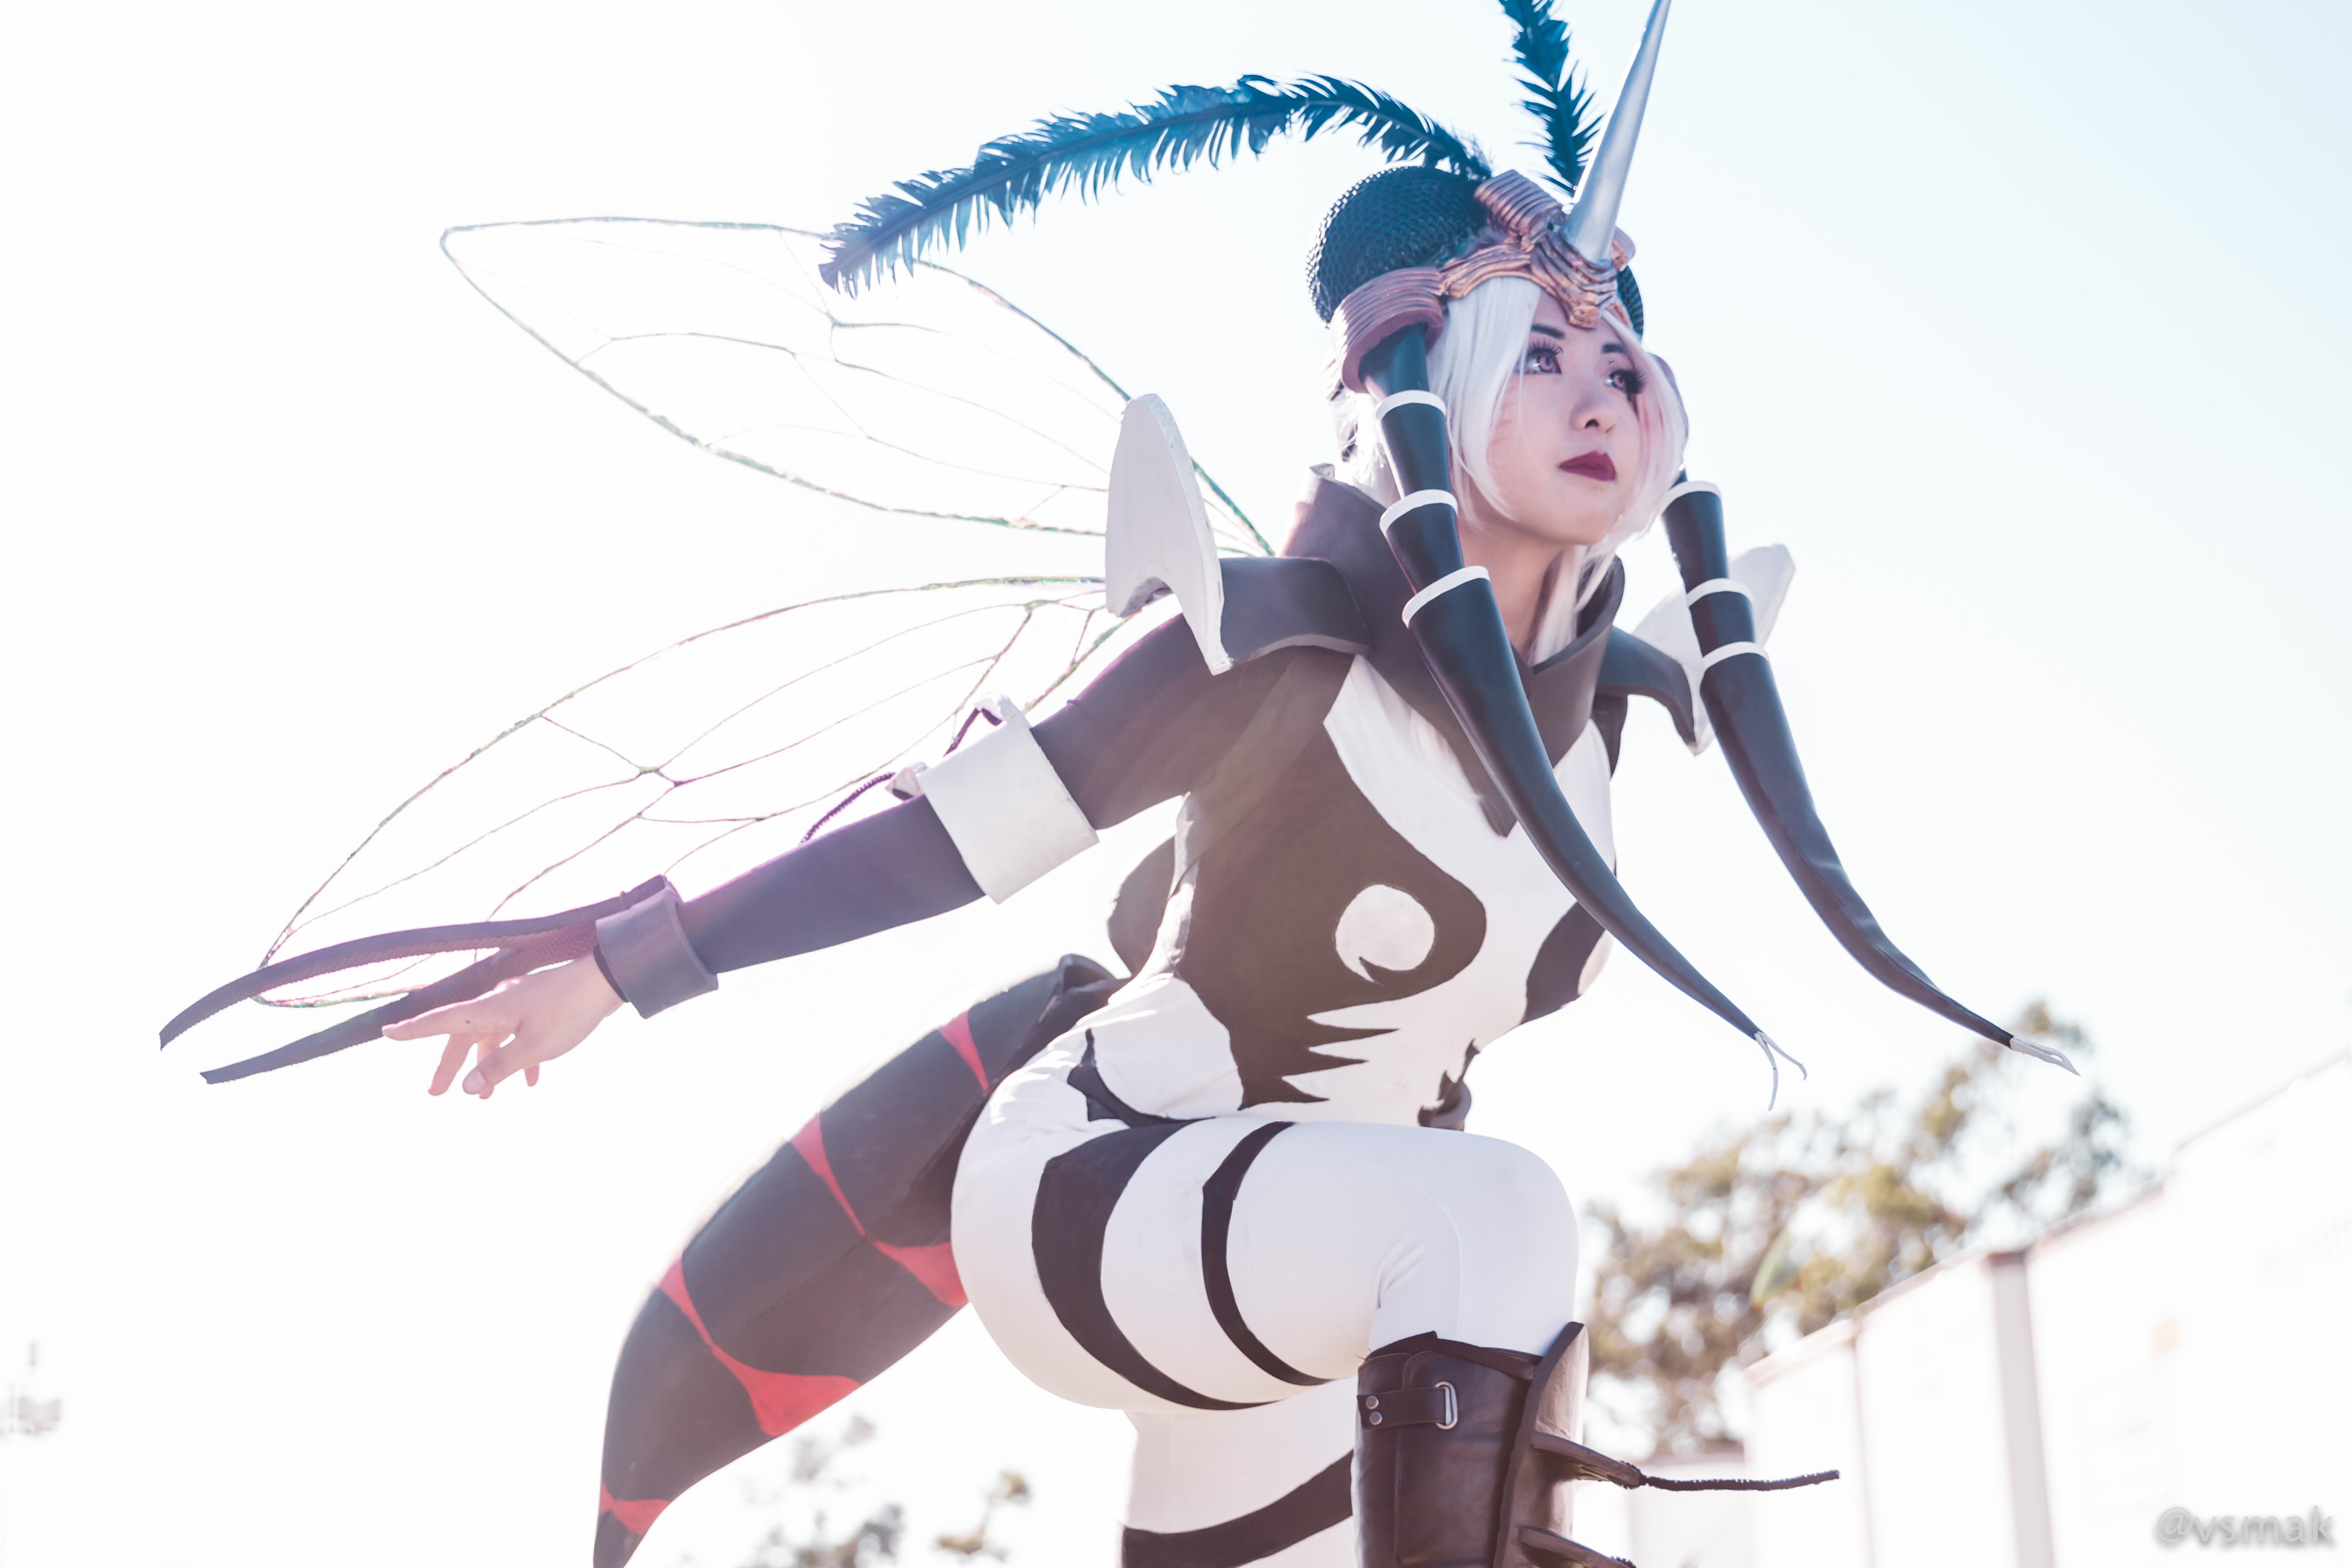 Mosquito Girl (One Punch Man) by rinmieru